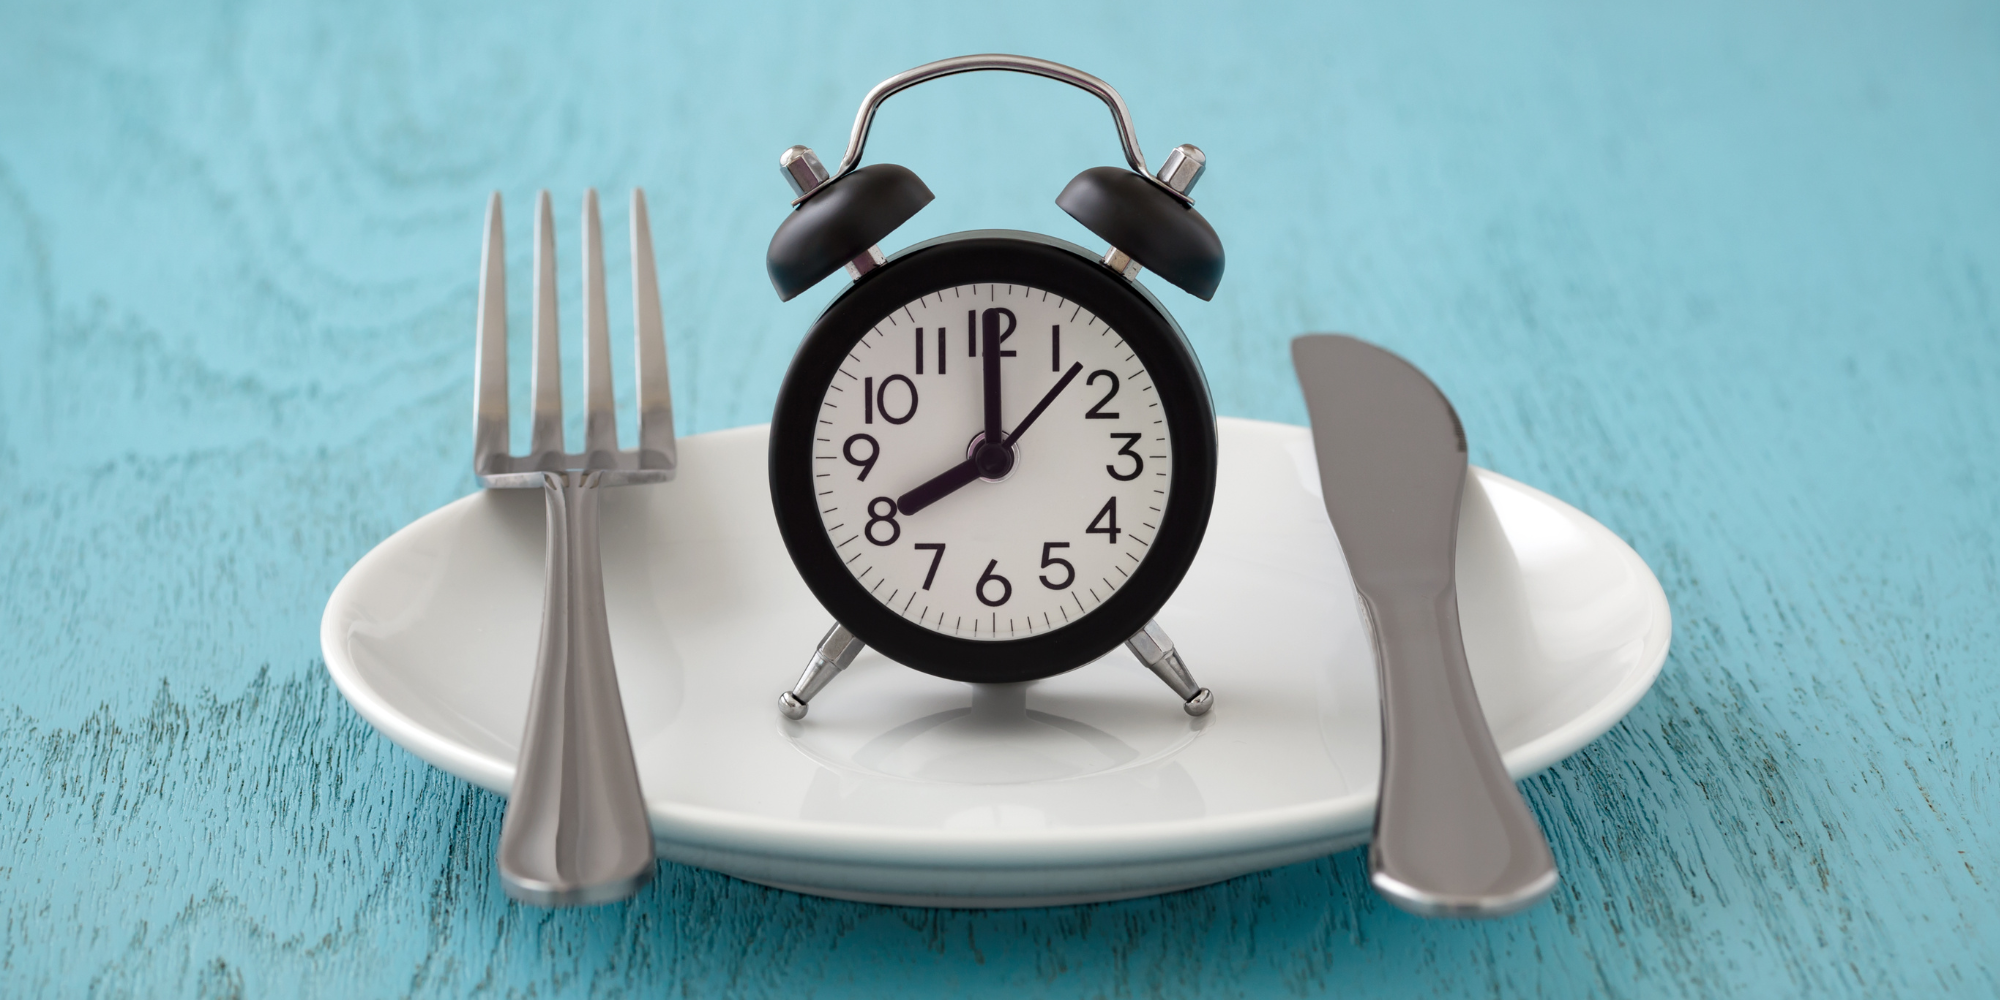 A silver knife and fork are arranged in parallel atop a white plate. Between the utensils, there is an old fashioned analogue alarm clock. The plate has no food on it symbolizing intermittent fasting. 